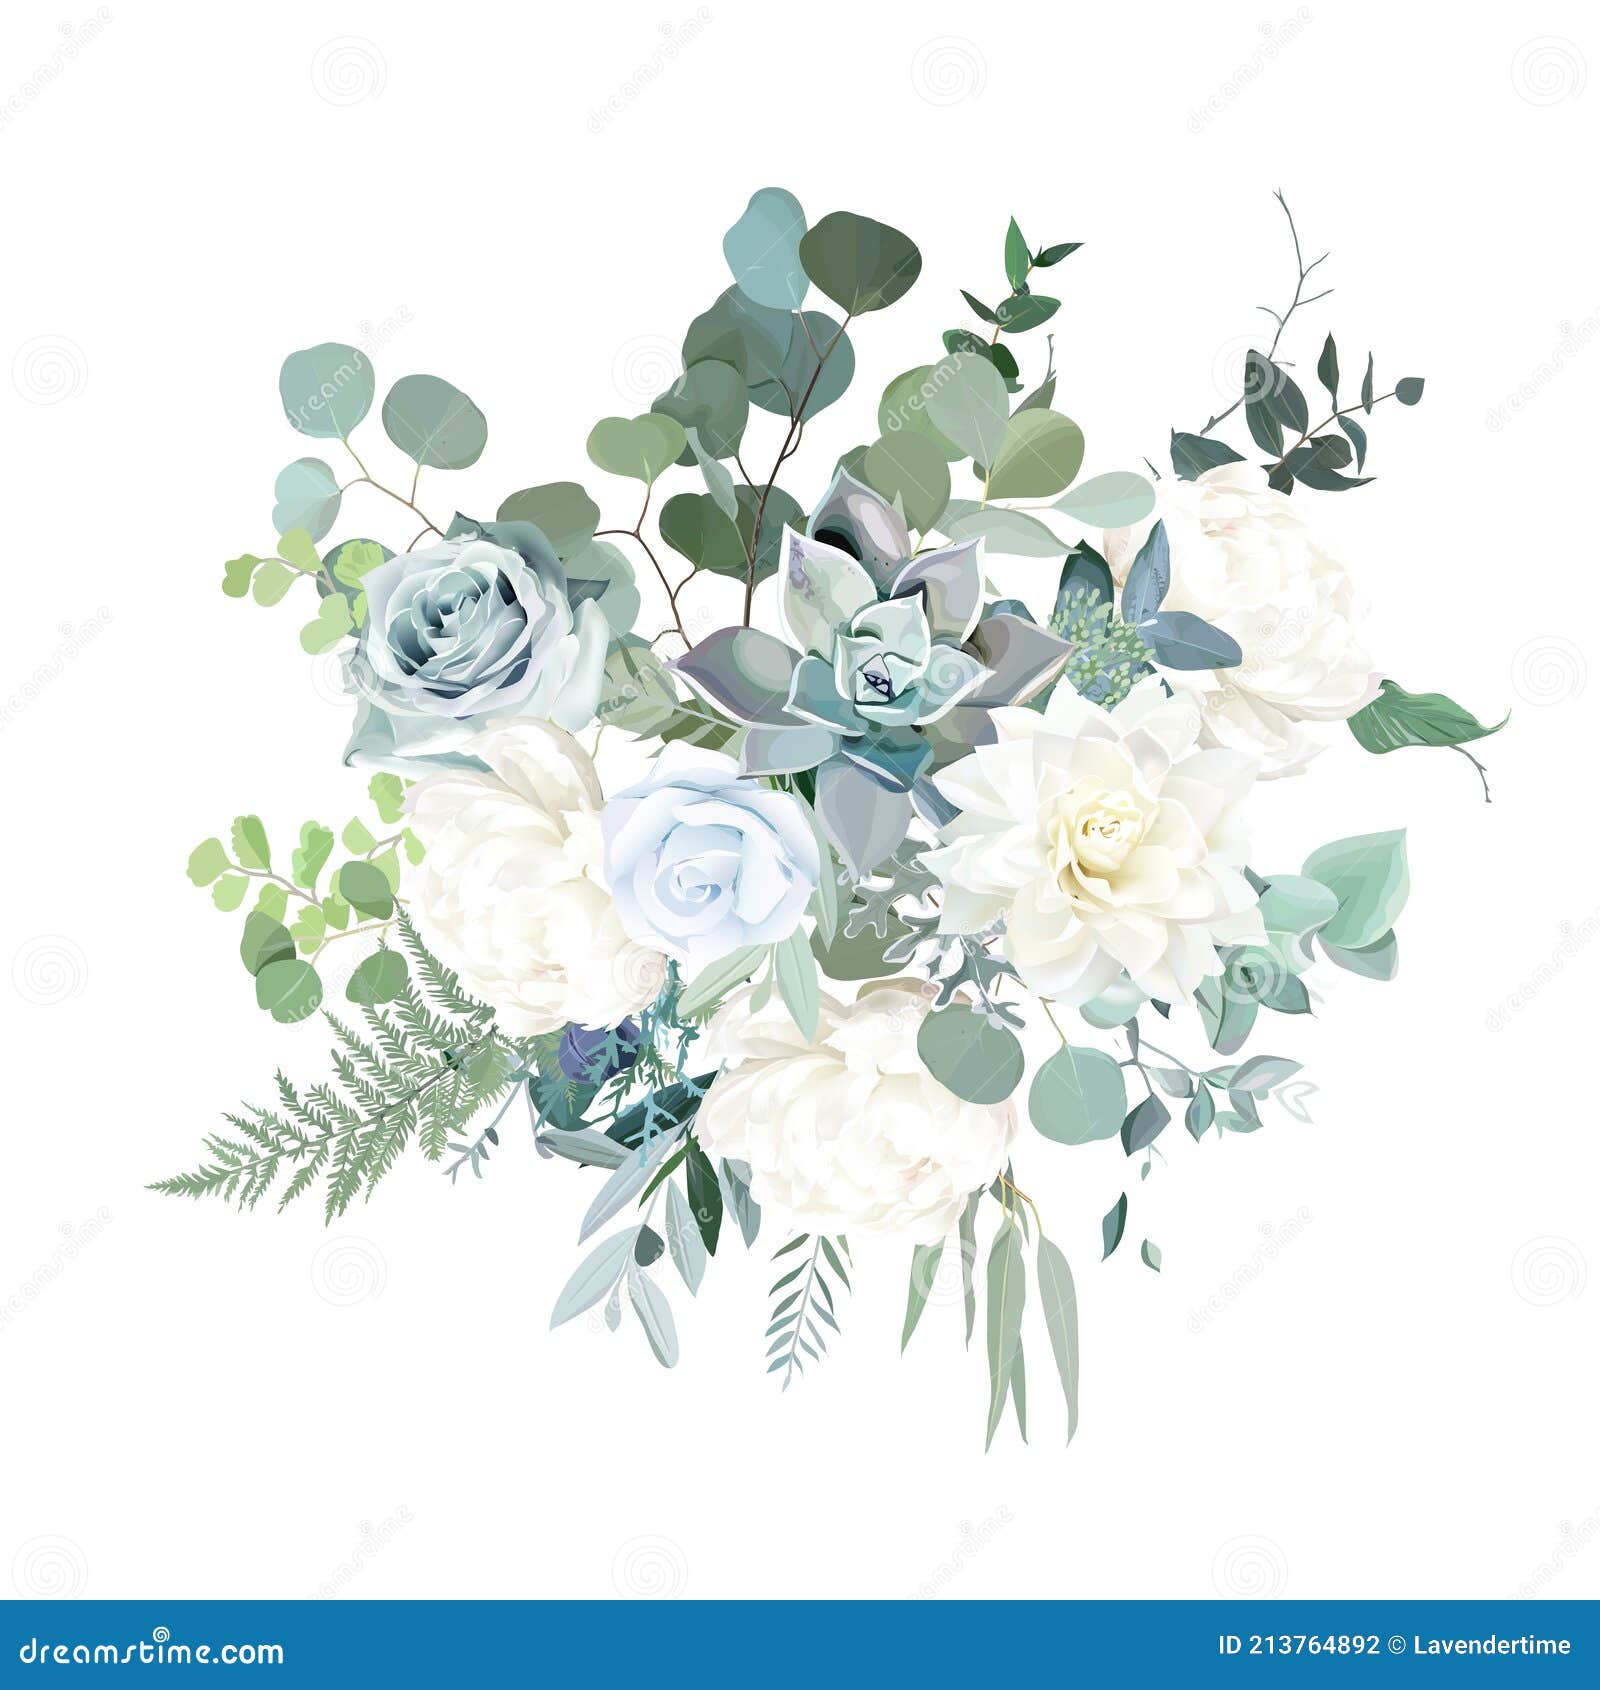 silver sage green, mint, blue, white flowers   spring bouquet.